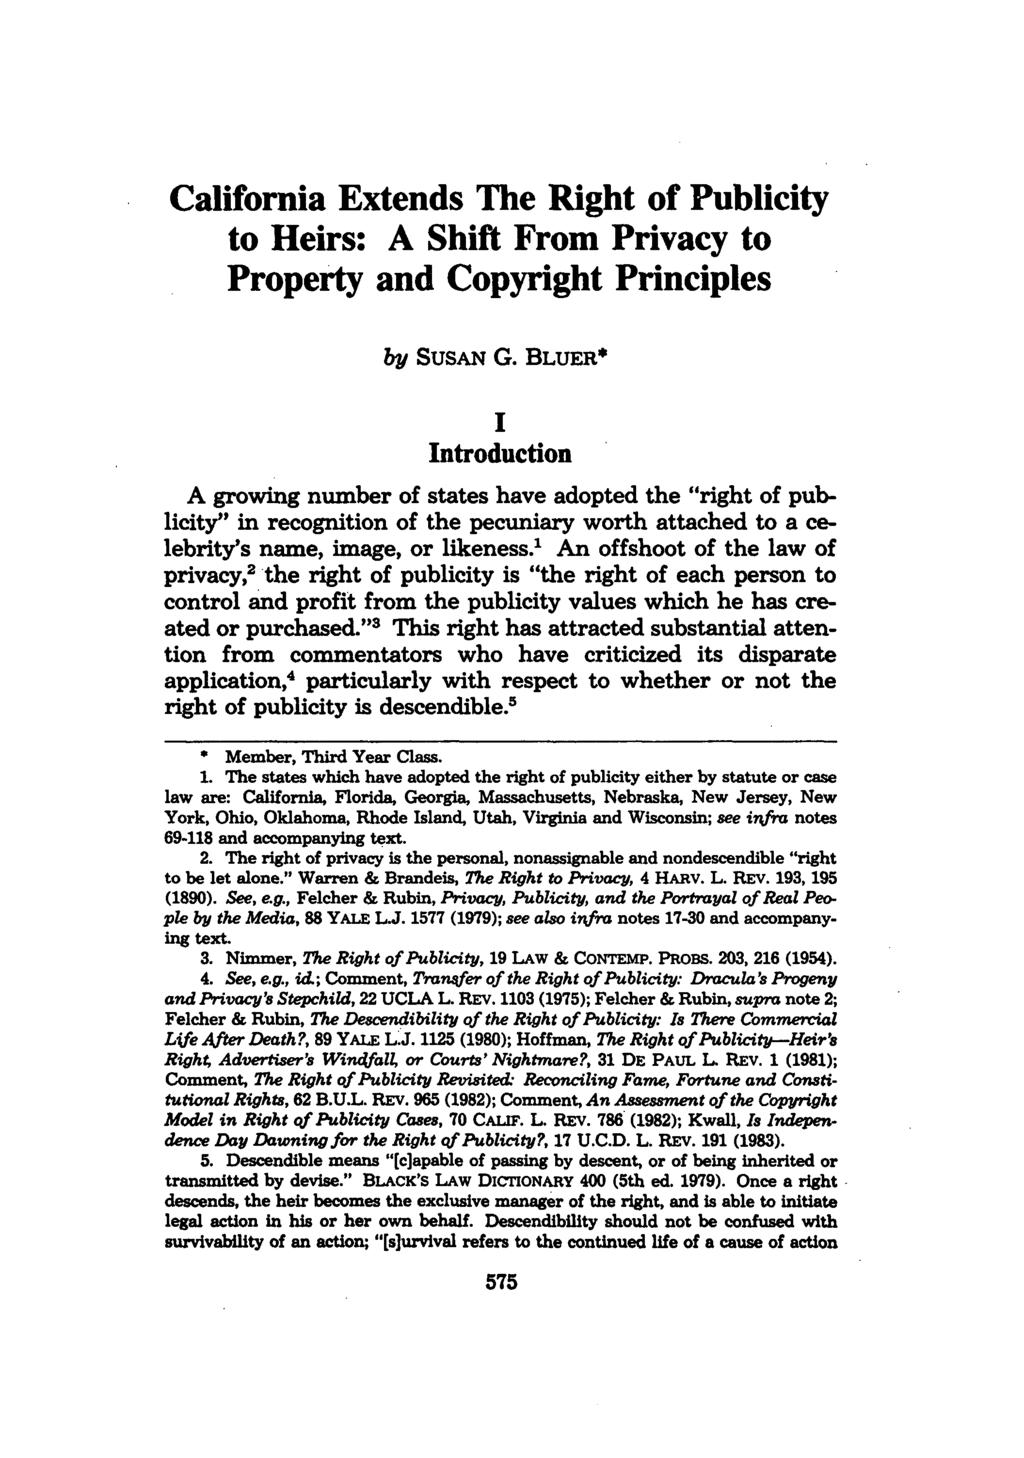 California Extends The Right of Publicity to Heirs: A Shift From Privacy to Property and Copyright Principles by SusAN G.